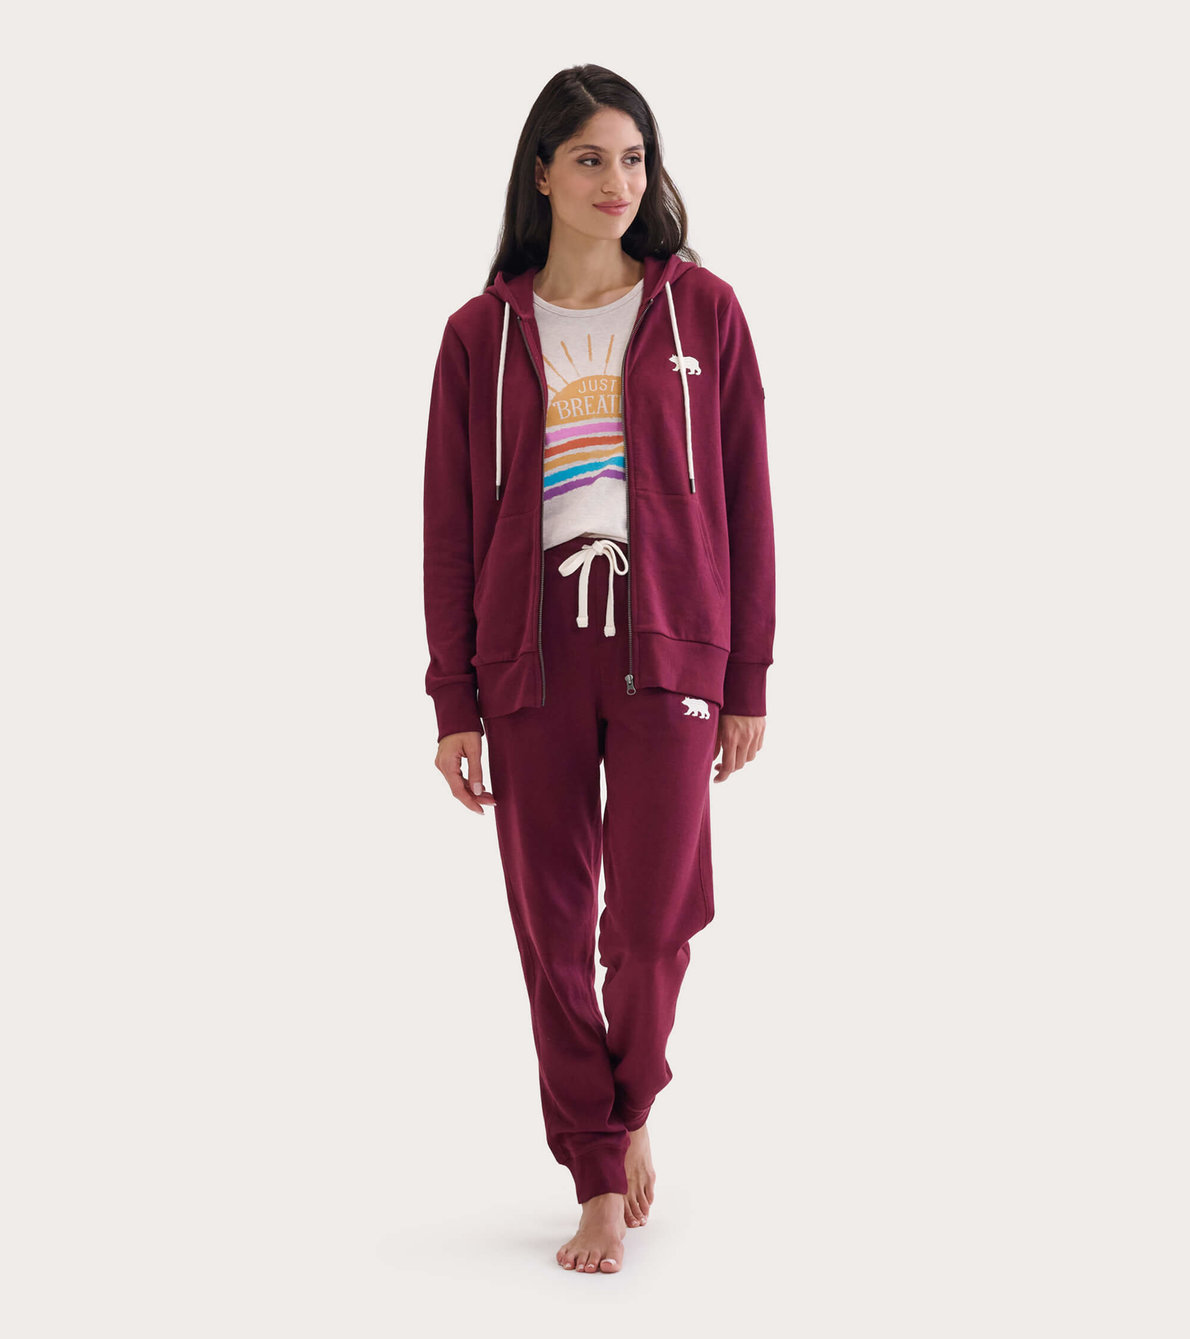 View larger image of Maroon Bear Heritage Women's Slim Fit Joggers